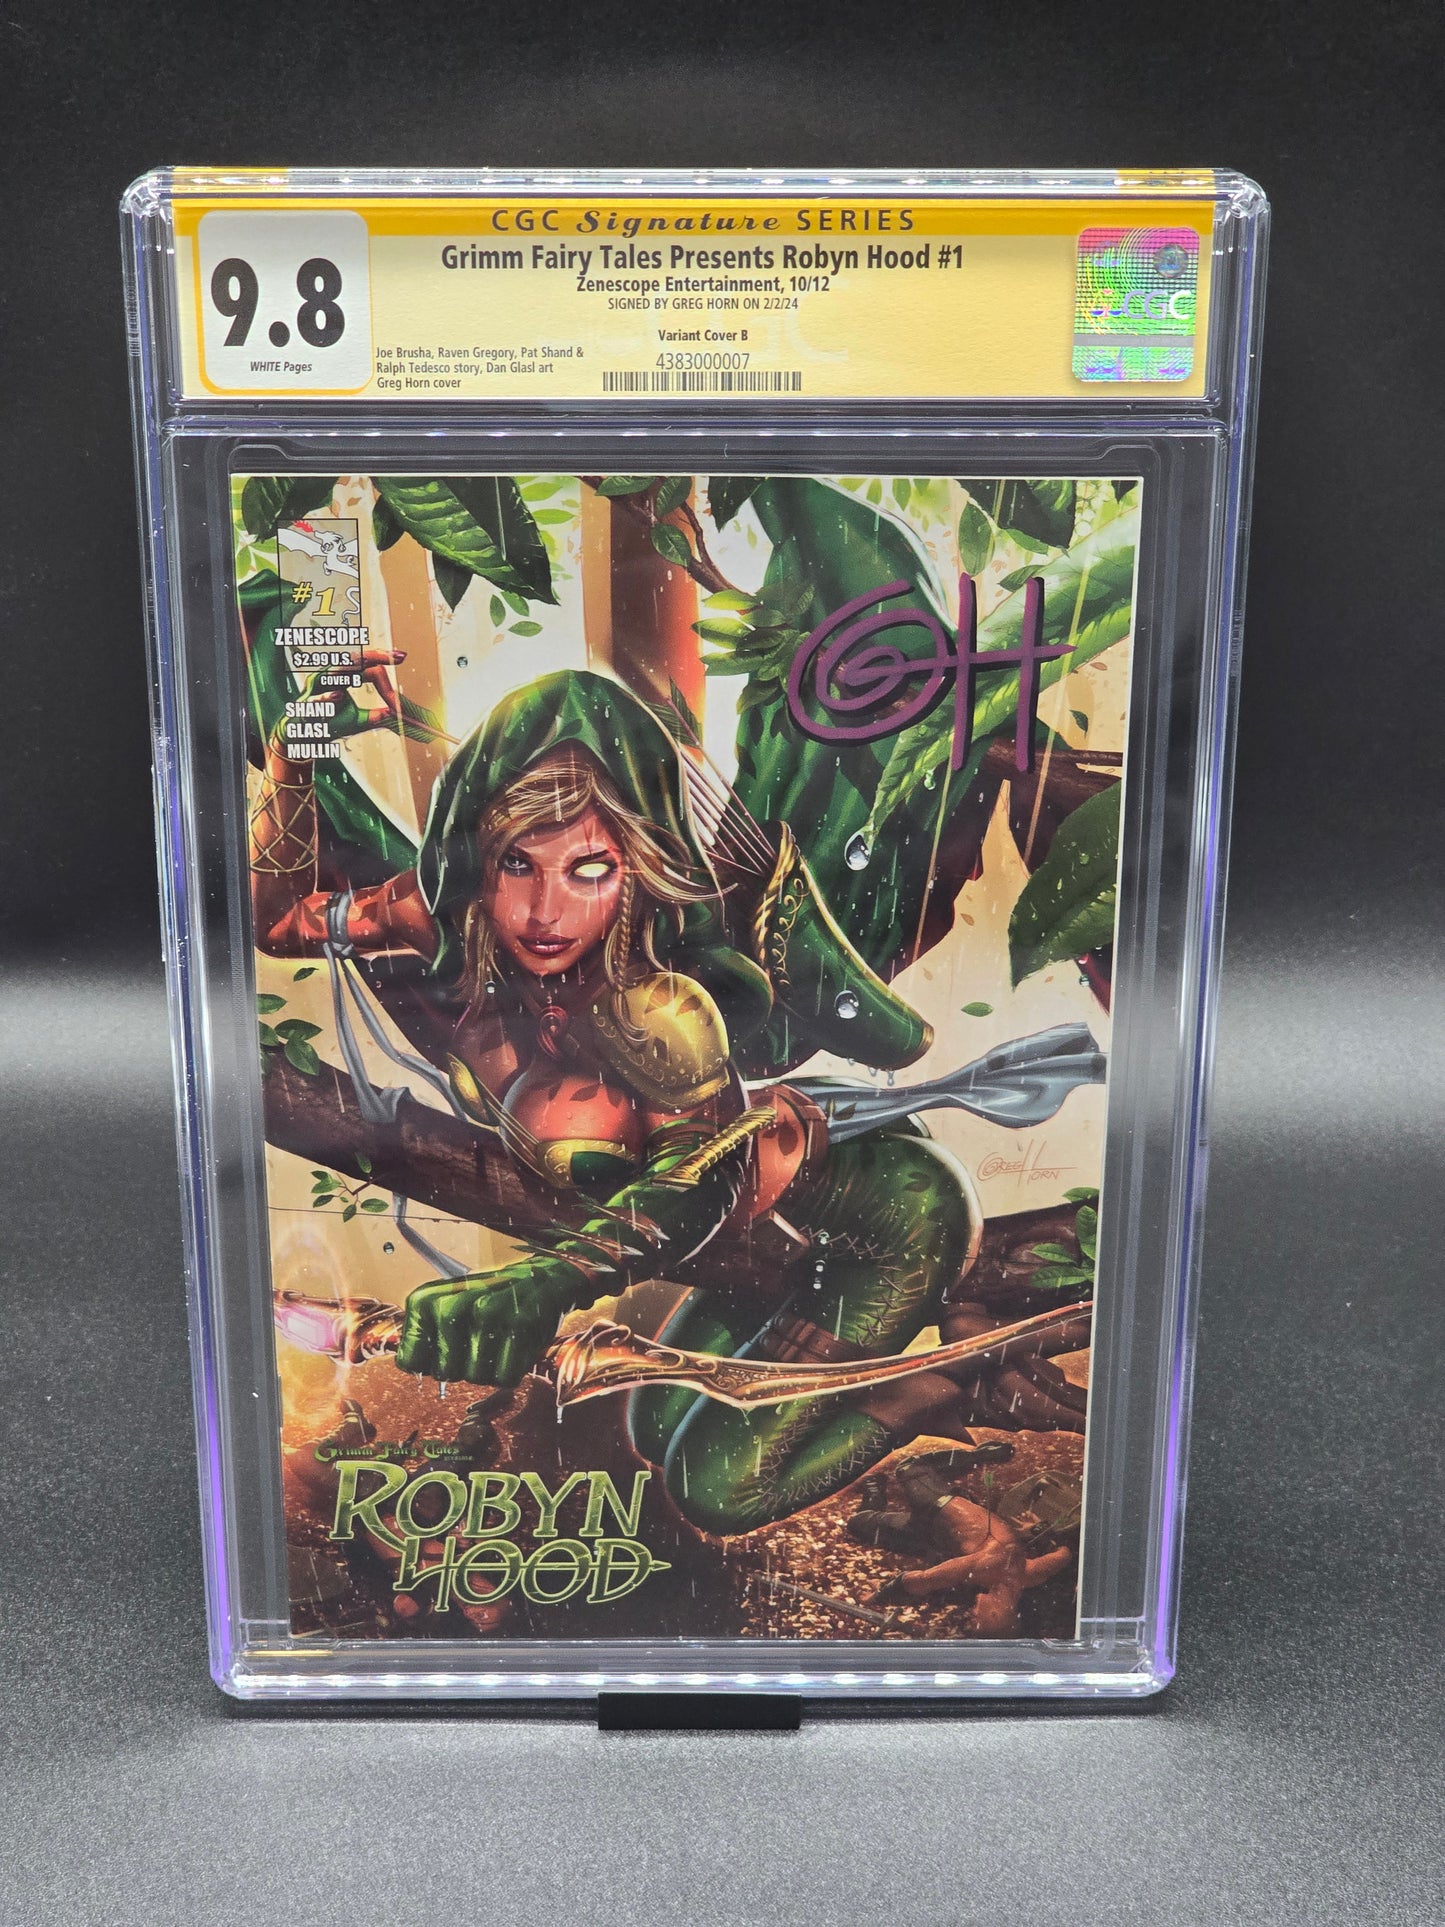 Grimm Fairy Tales Presents Robyn Hood #1 CGC SS 9.8 (variant cover B) Signed by Greg Horn